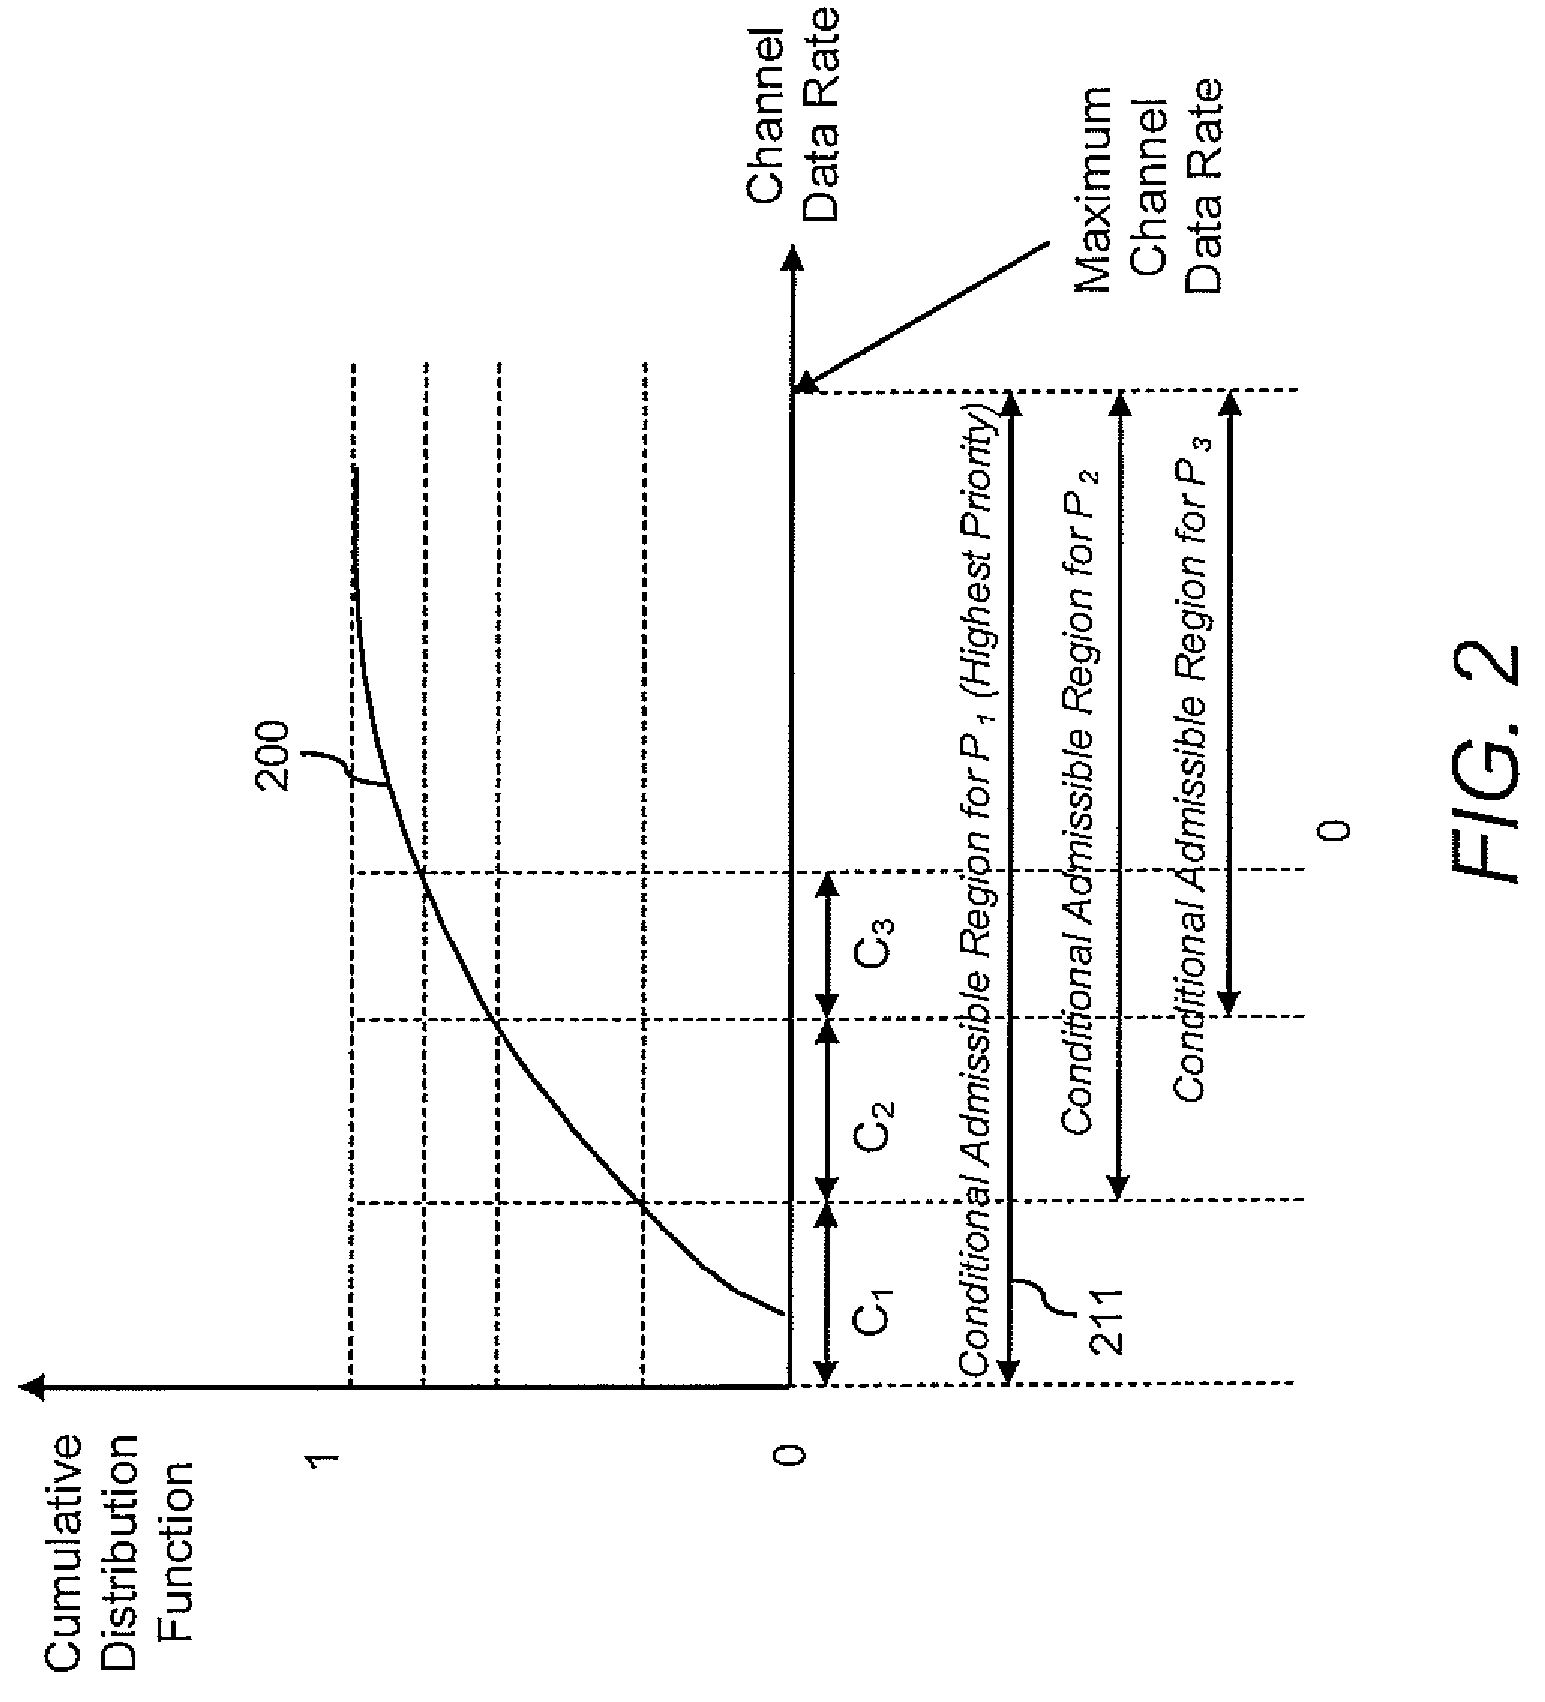 Priority-based admission control in a network with variable channel data rates